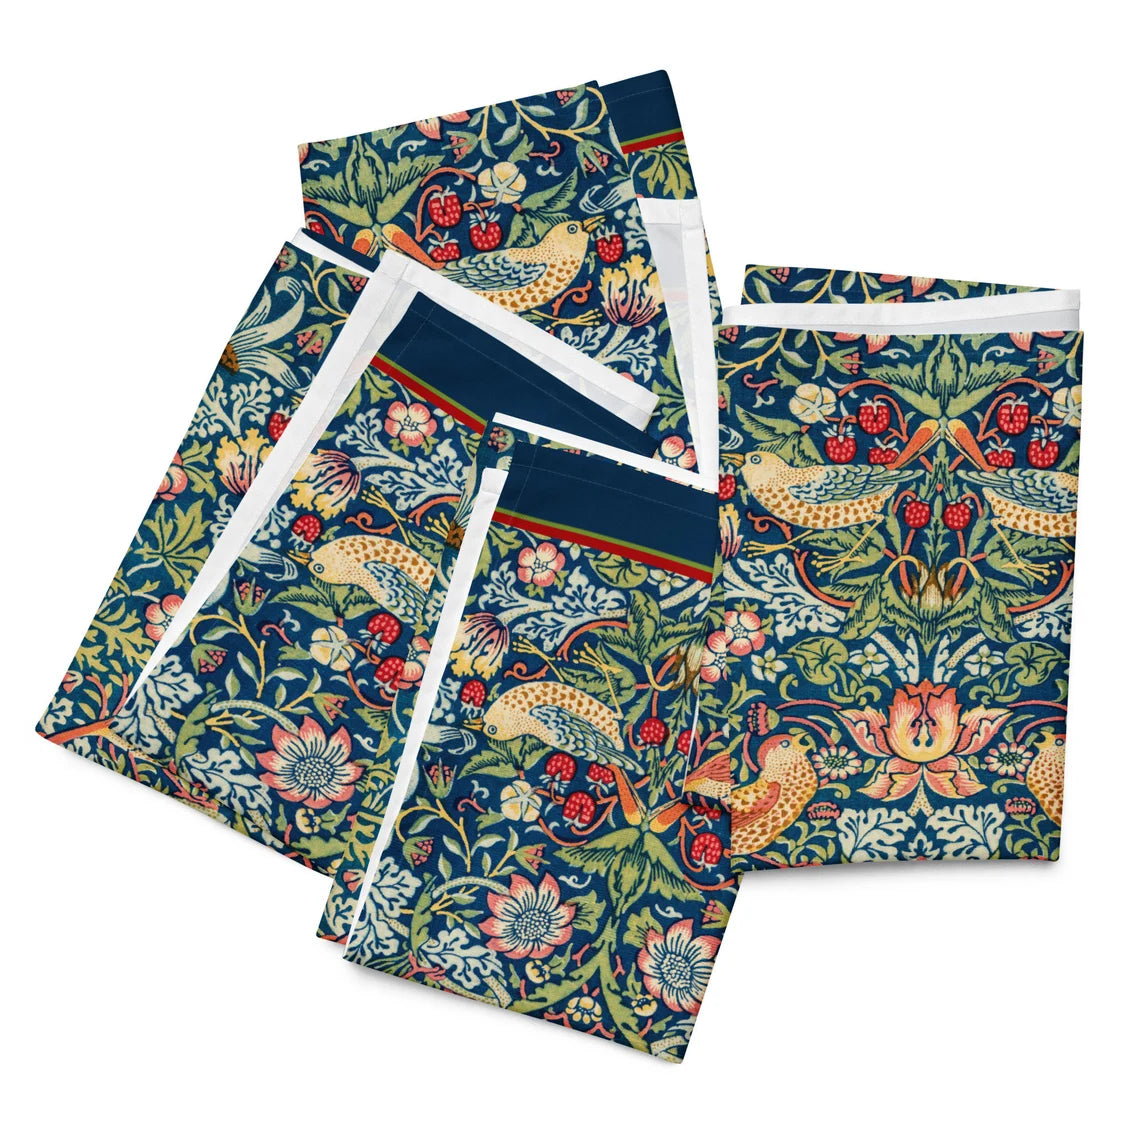 The Strawberry Thieves, William Morris Cloth Napkins, Add Charm to Your Table, 20in x 20in (50.8 cm x 50.8 cm), Set of 4 Napkins